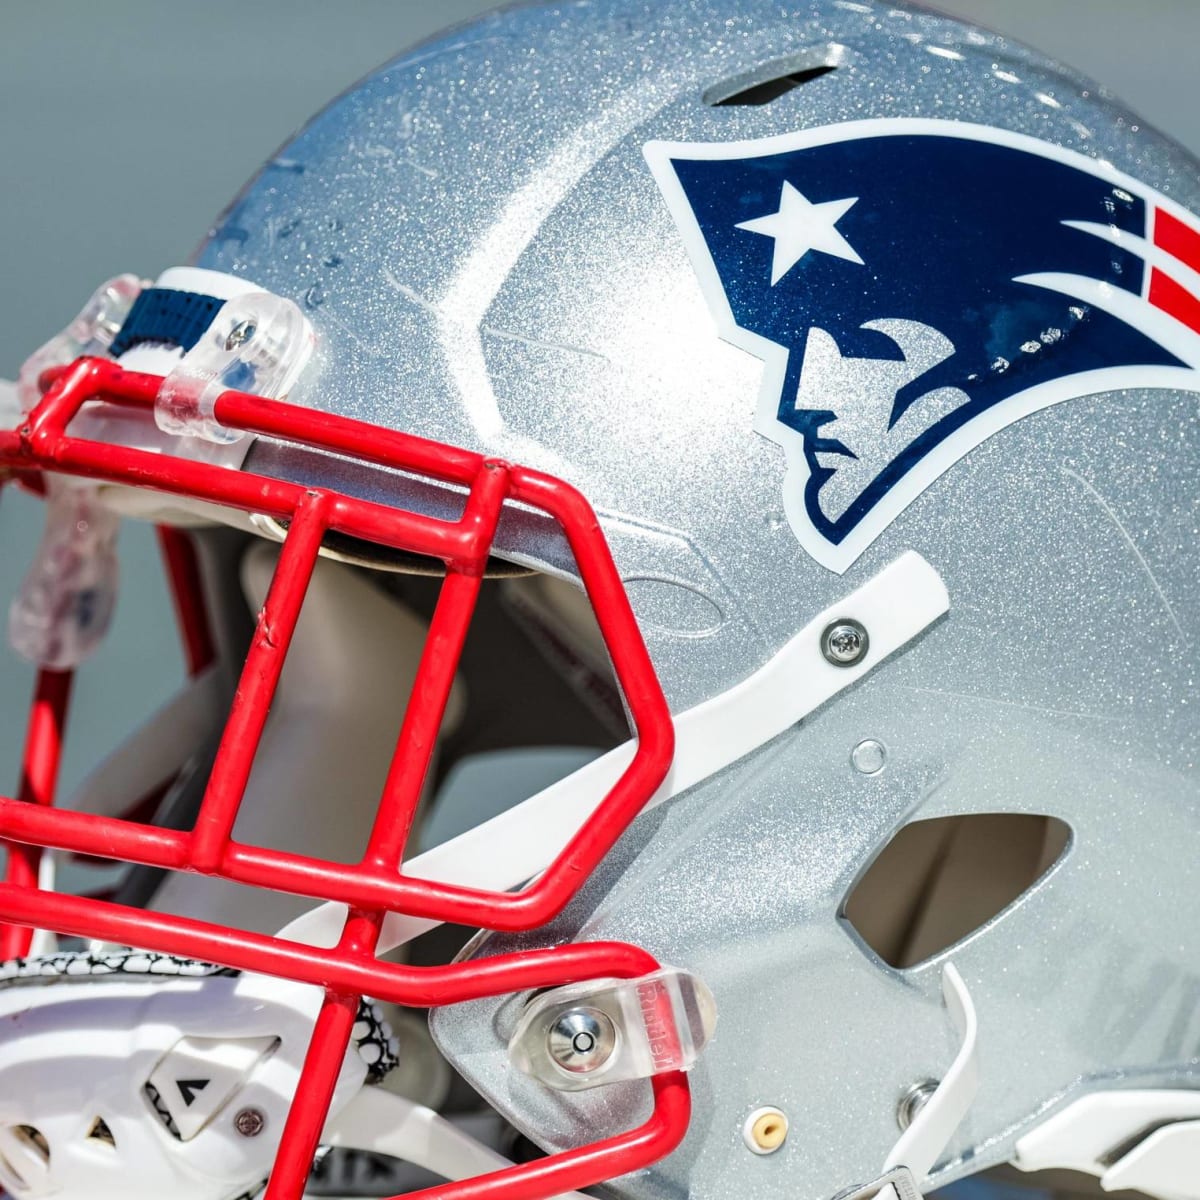 Patriots reveal when they will wear their throwbacks this season - Pats  Pulpit